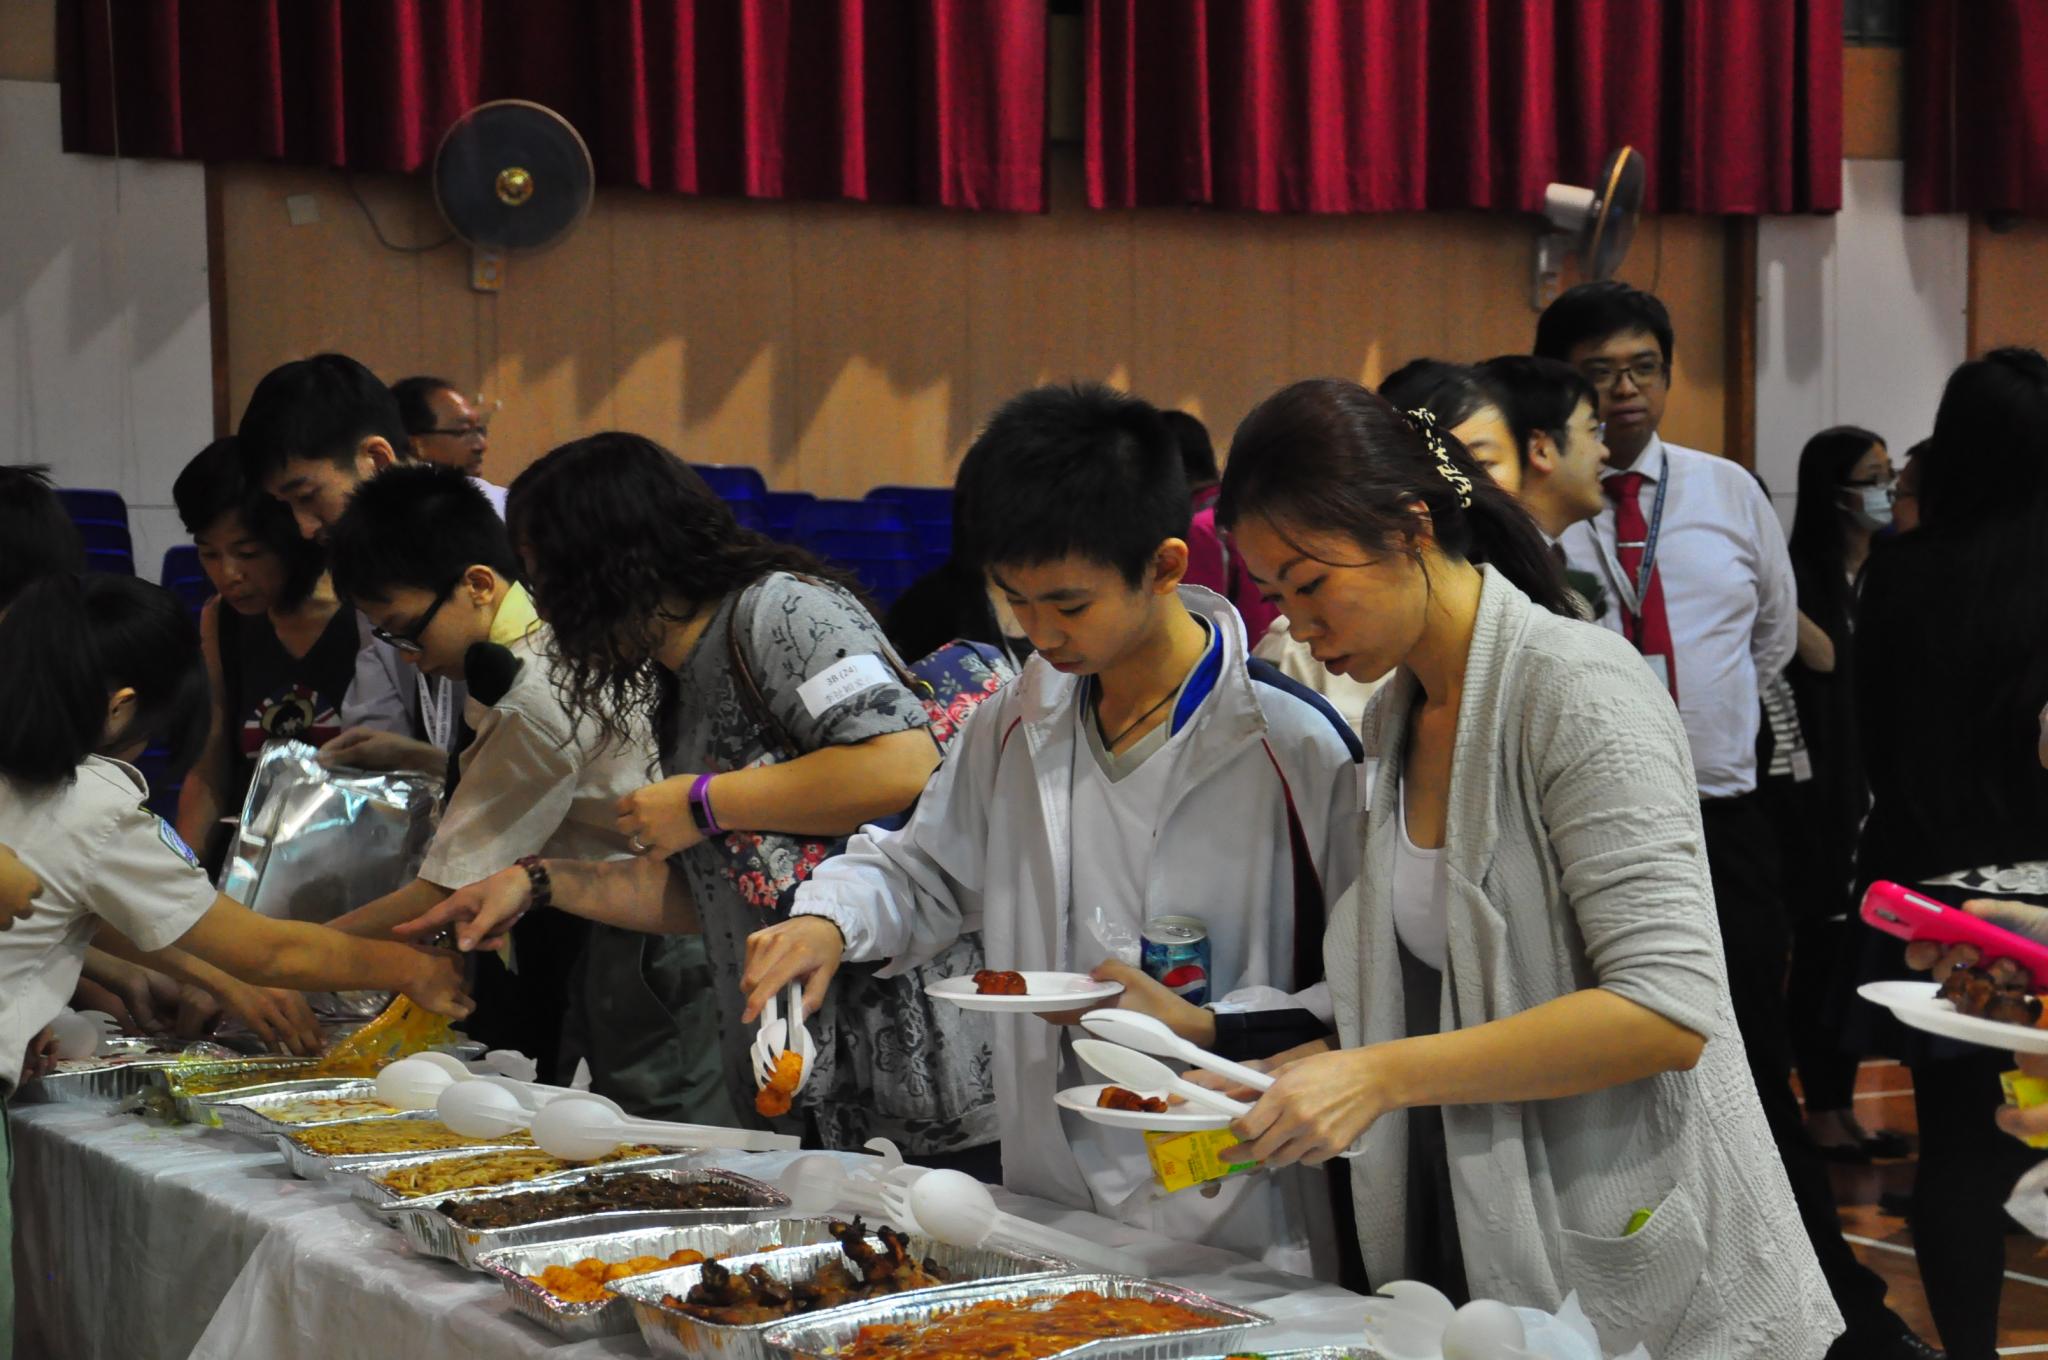 The participants are enjoying the buffet dinner.